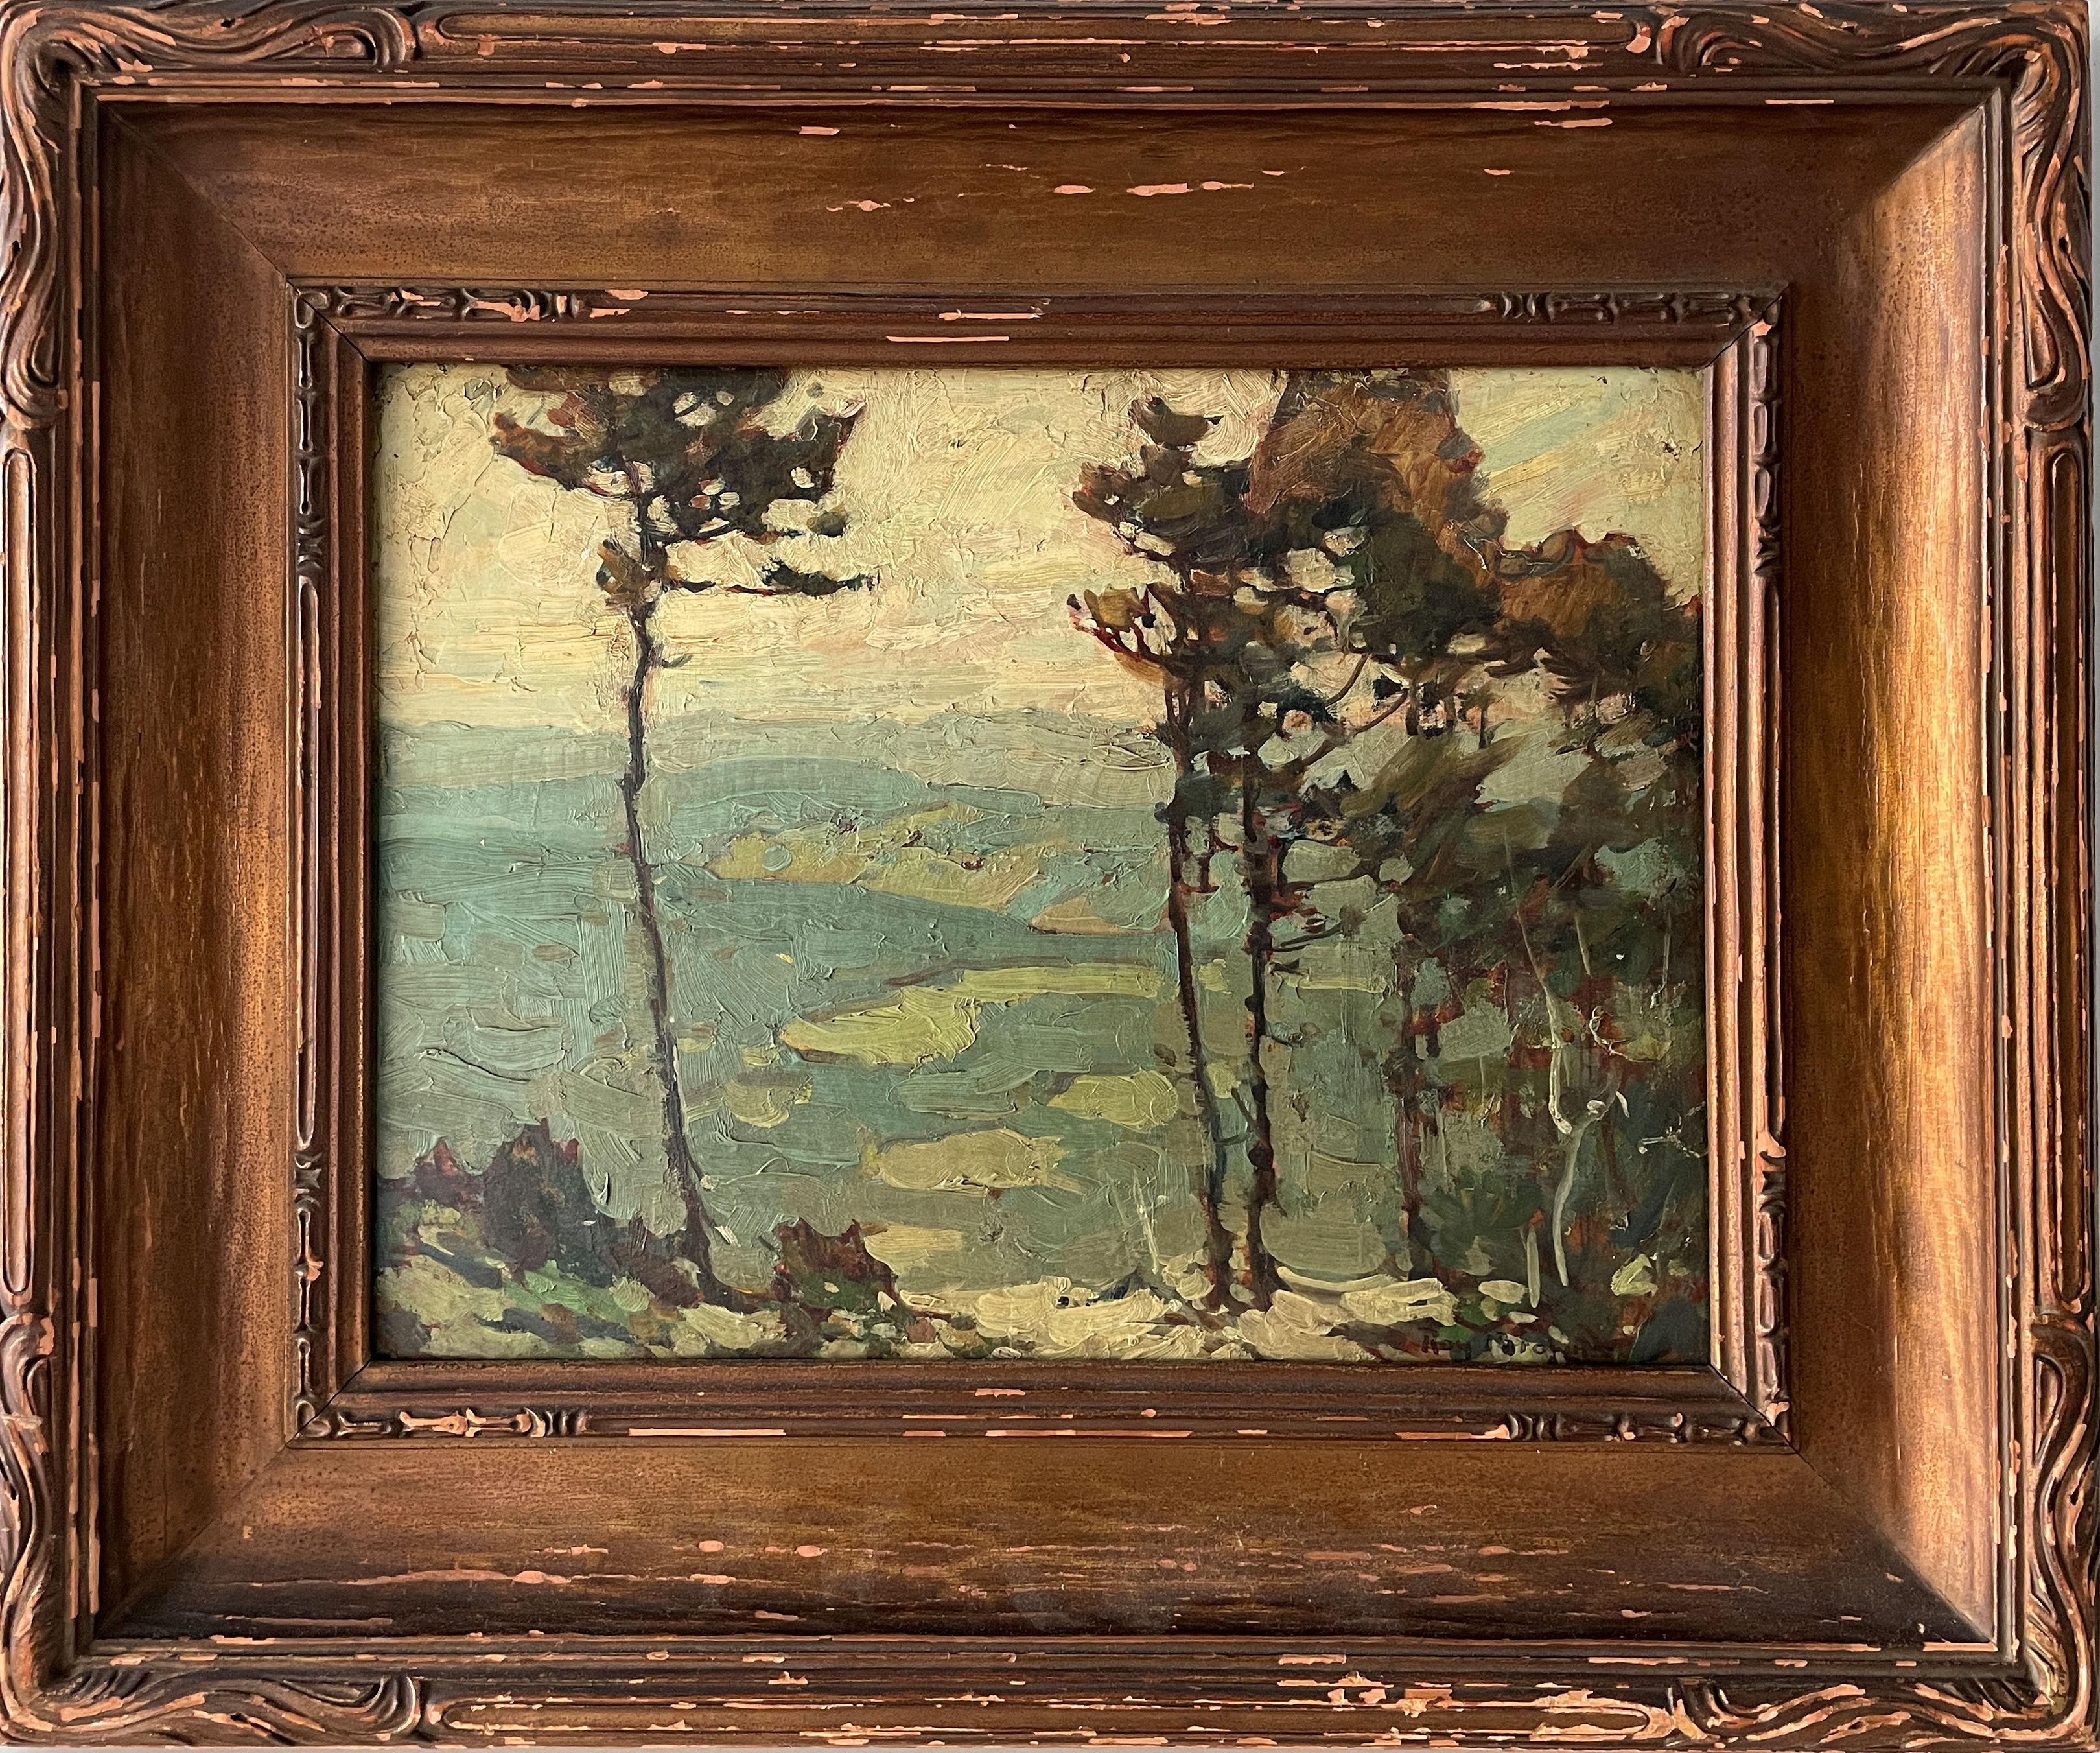 Roy Brown
European Landscape
Signed lower right
Oil on board
12 x 16 inches
Housed in a period Newcomb-Macklin frame

A prominent early 20th Century east coast artist, Roy Henry Brown was a landscape painter with studios in New York City in the